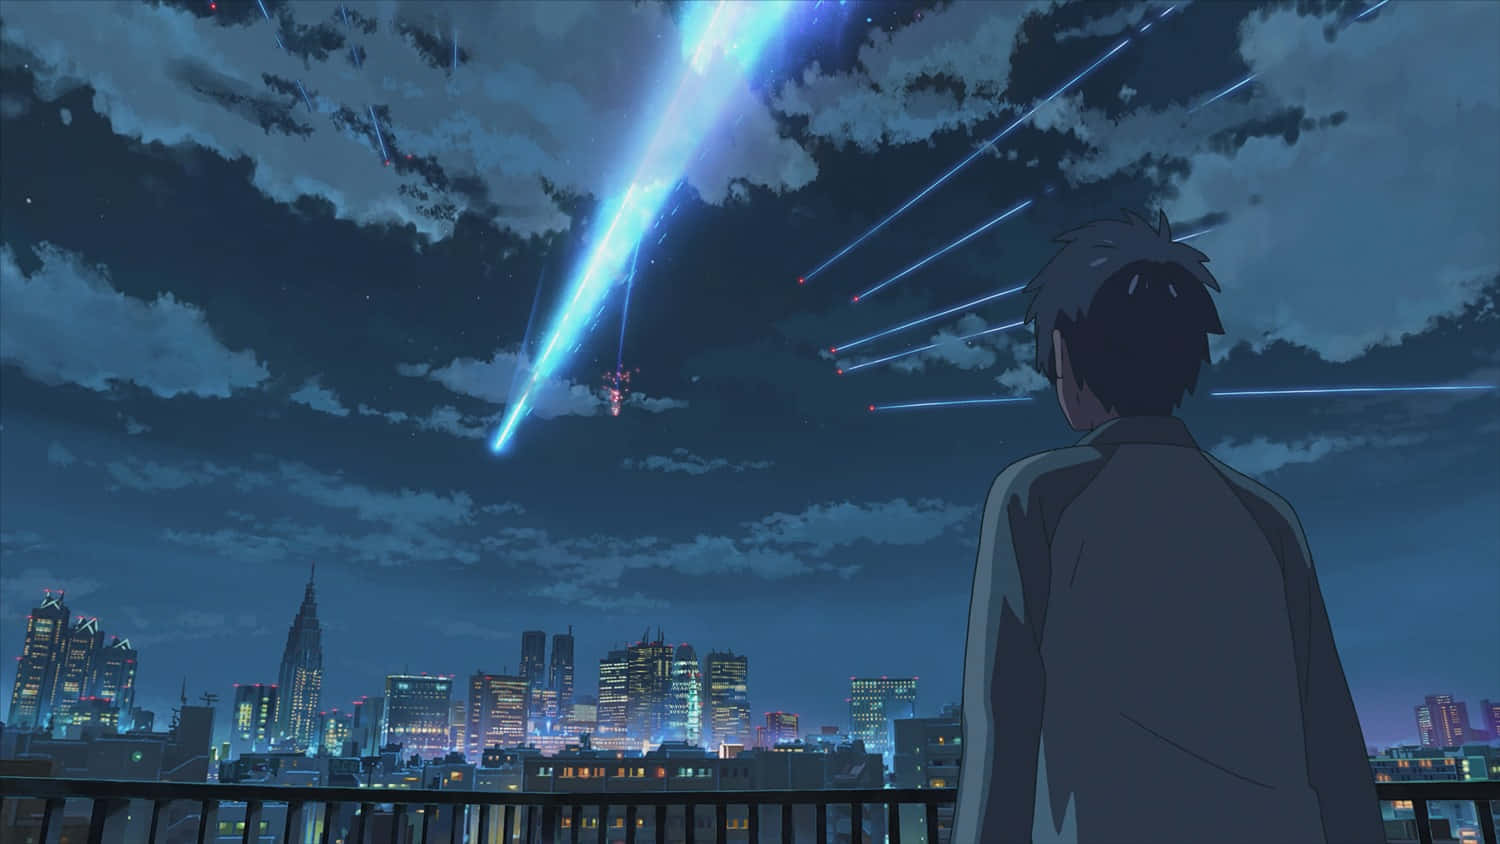 "City lights pass by as I wander in the night." – Kimi No Na Wa